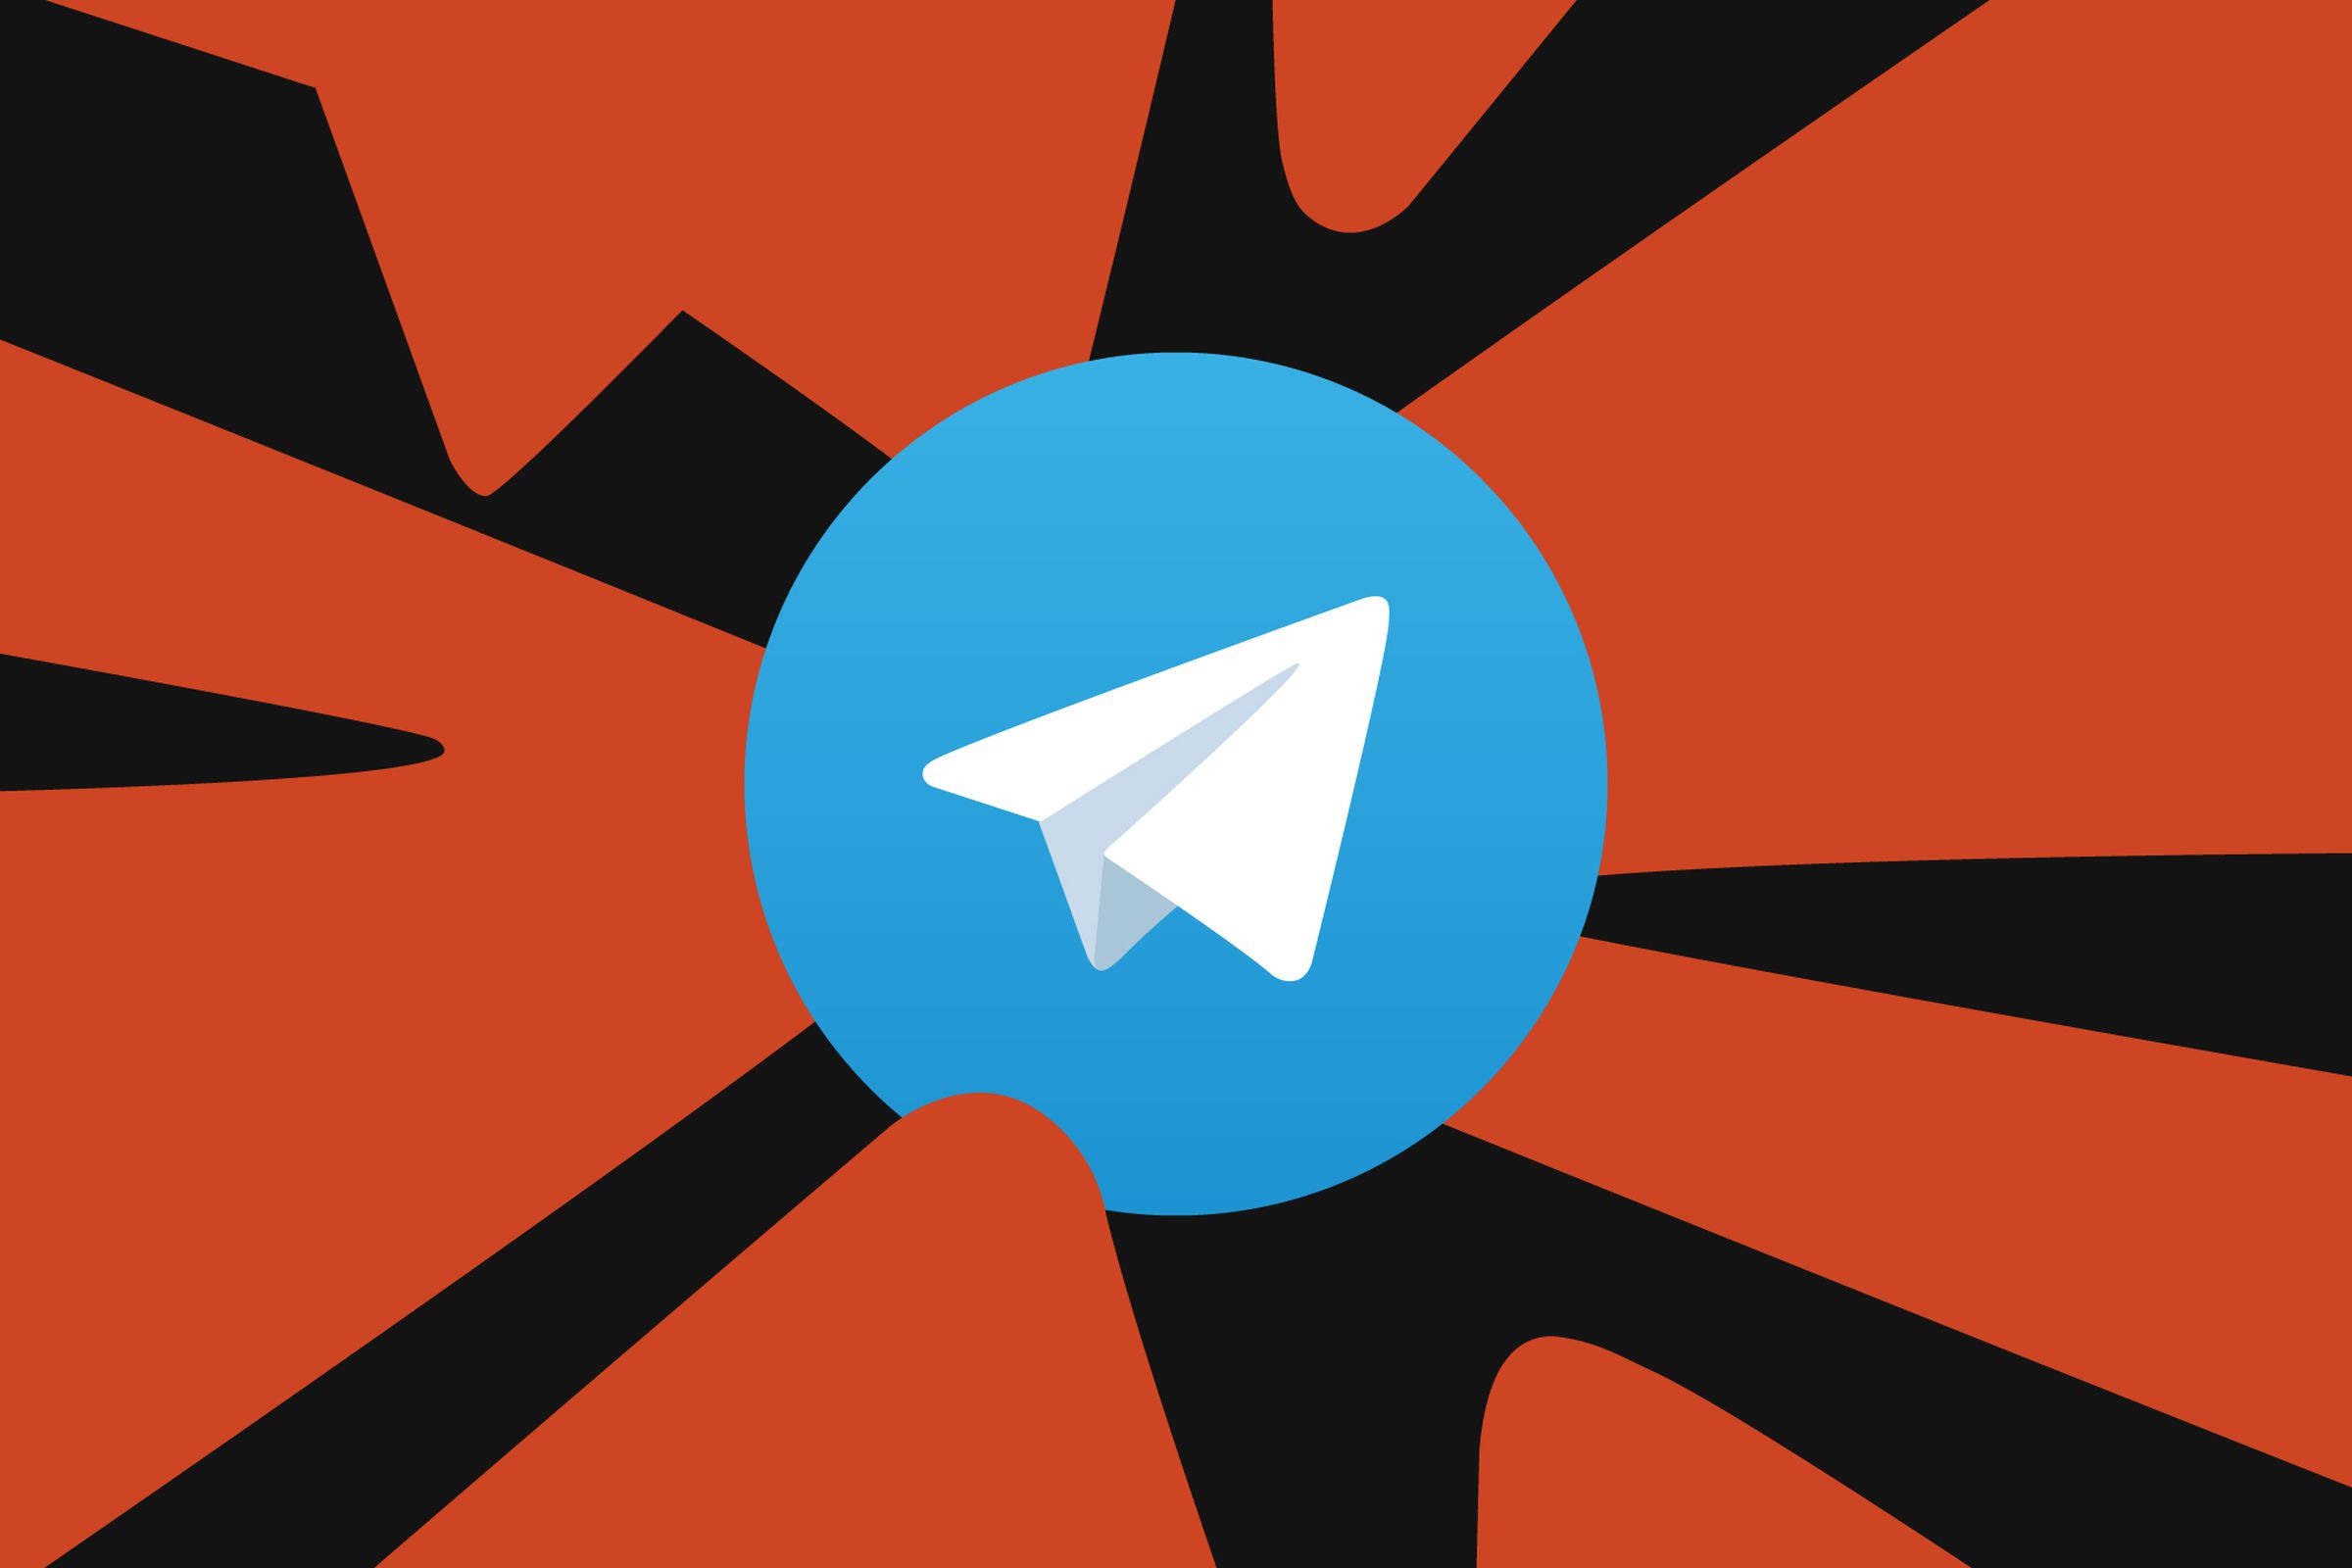 The Telegram logo on a black and red background